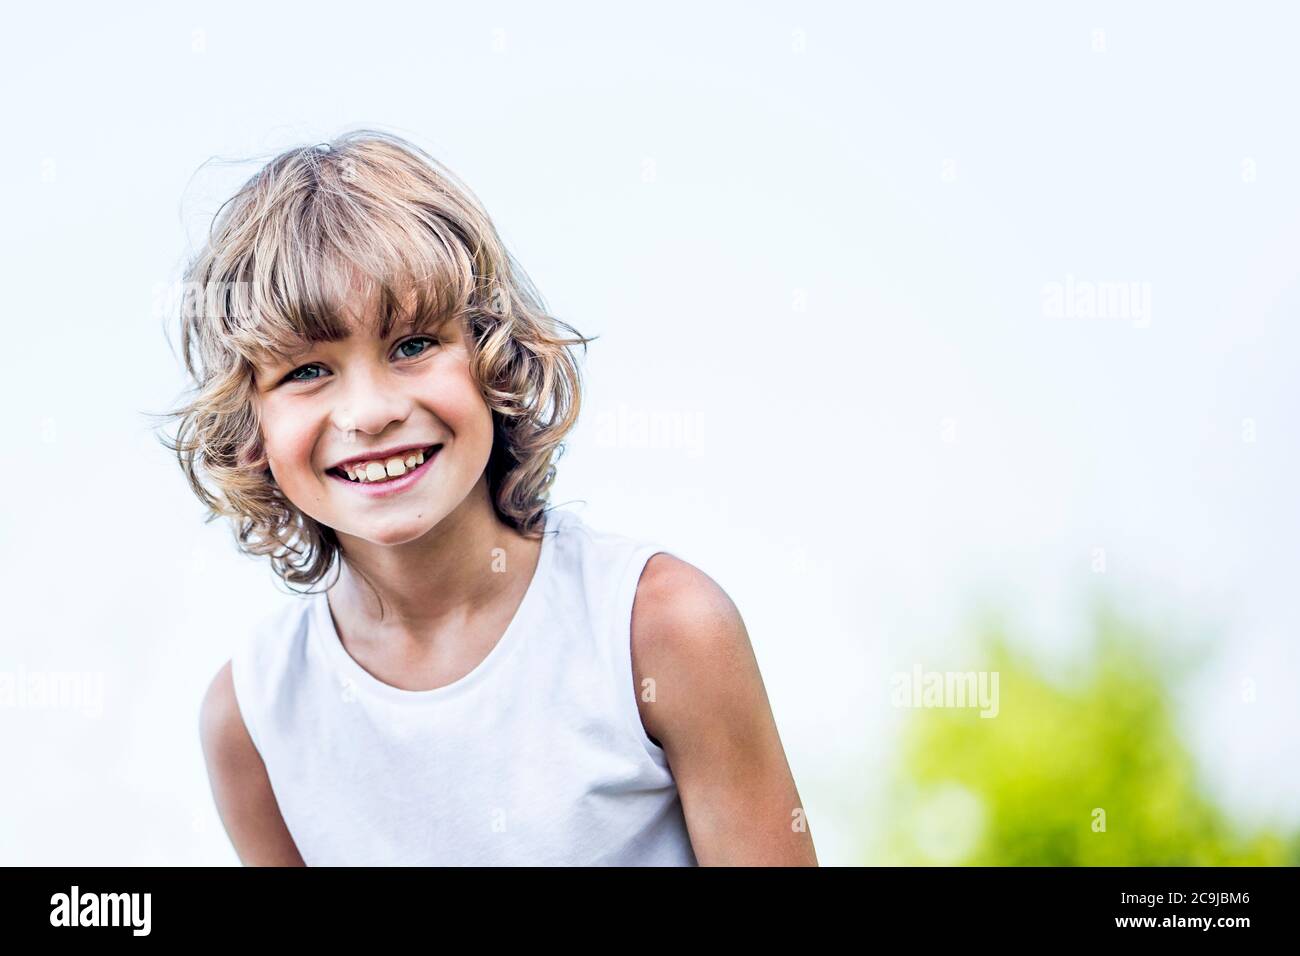 Boy with blonde hair smiling in park, portrait. Stock Photo